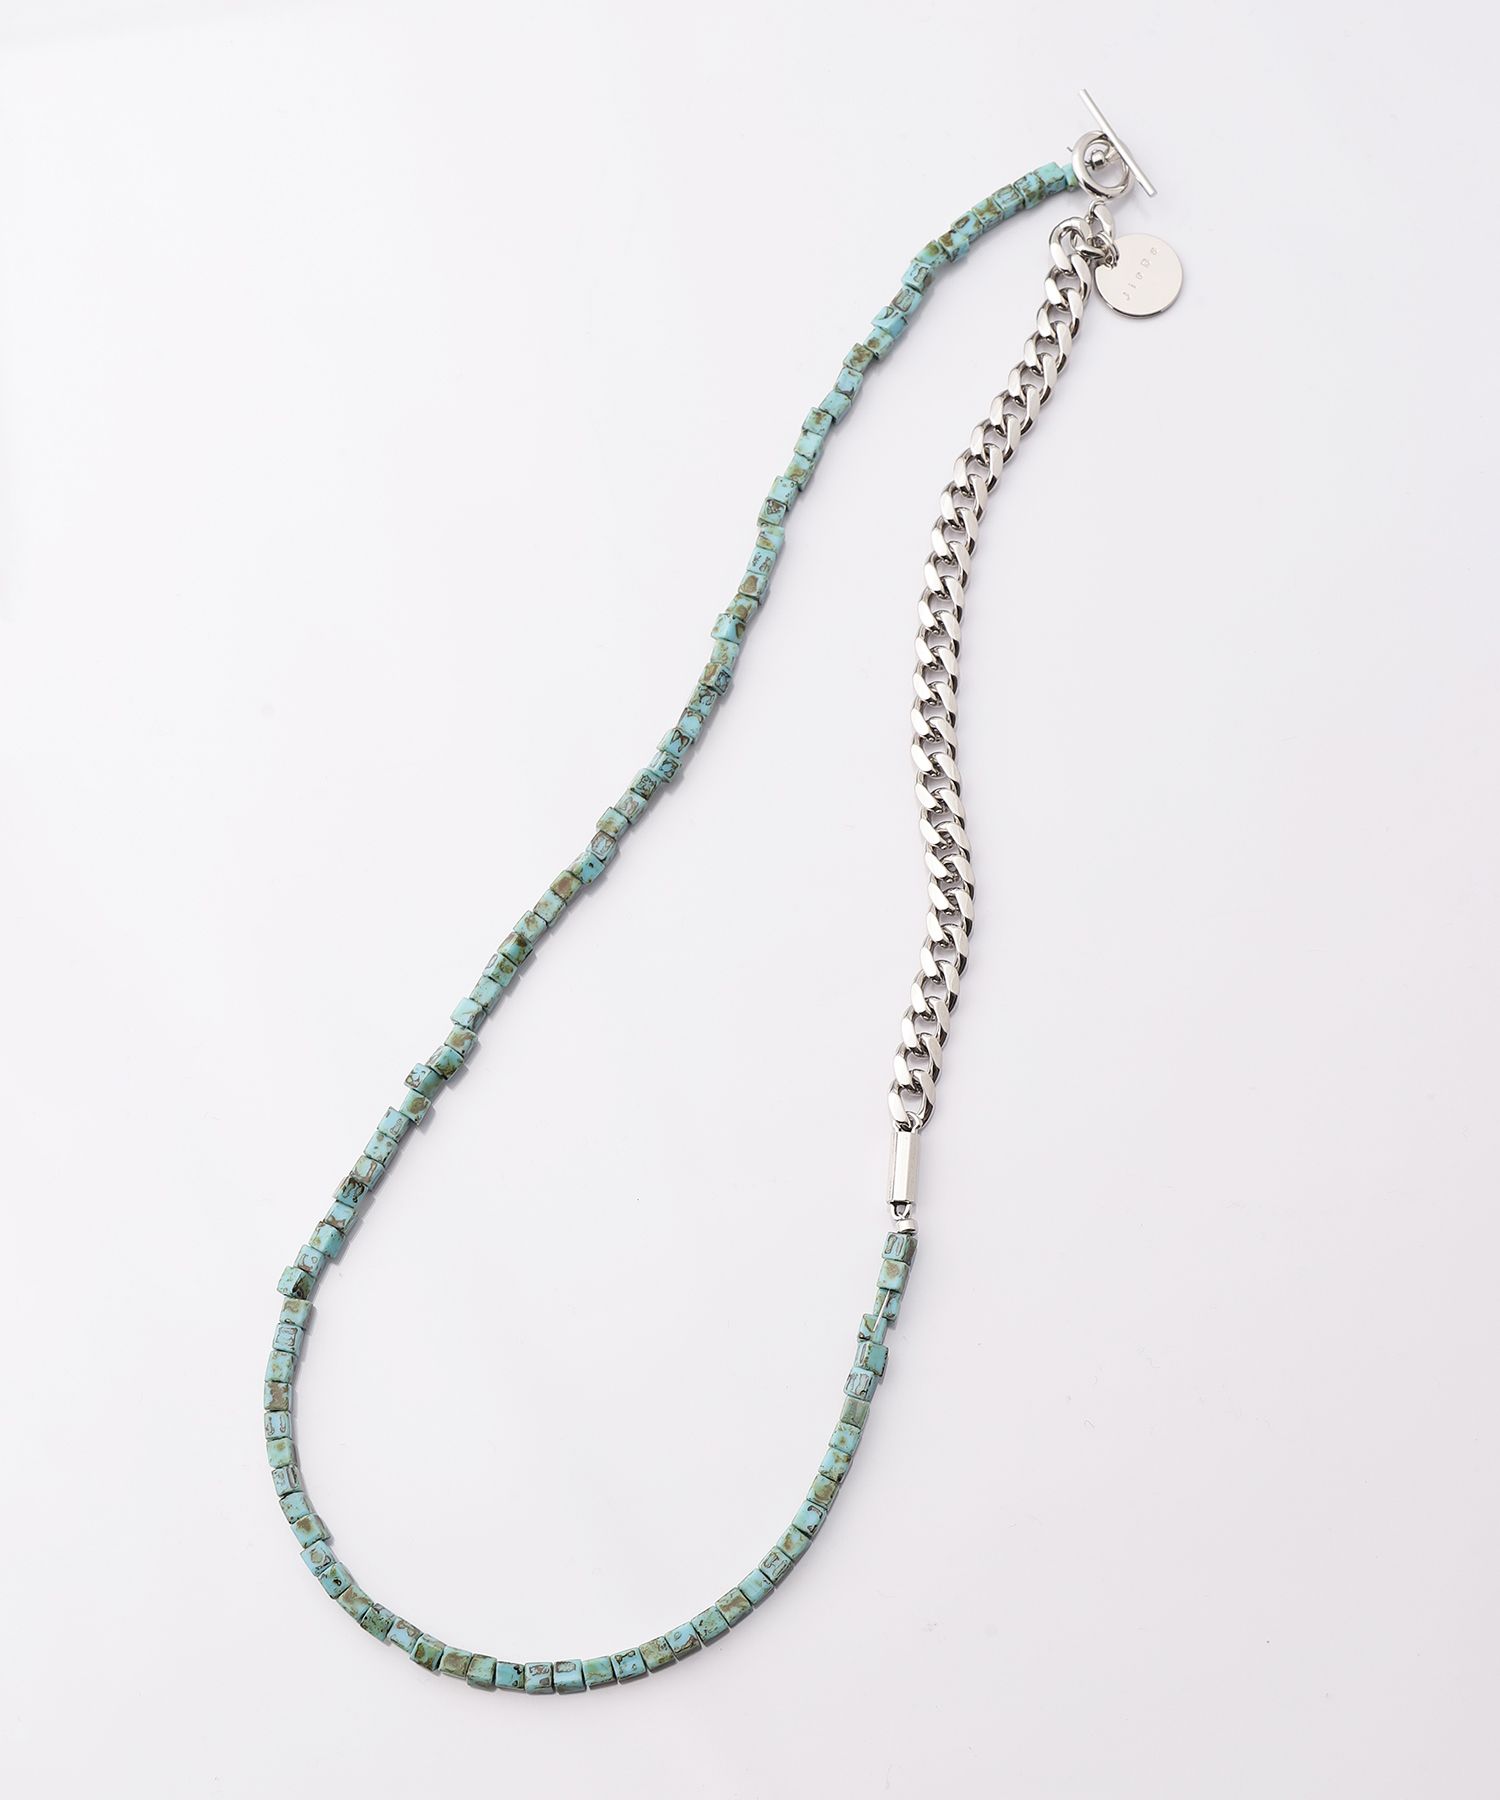 JieDa - SWITCHING BEADS NECKLACE/ネックレス（ビーズ